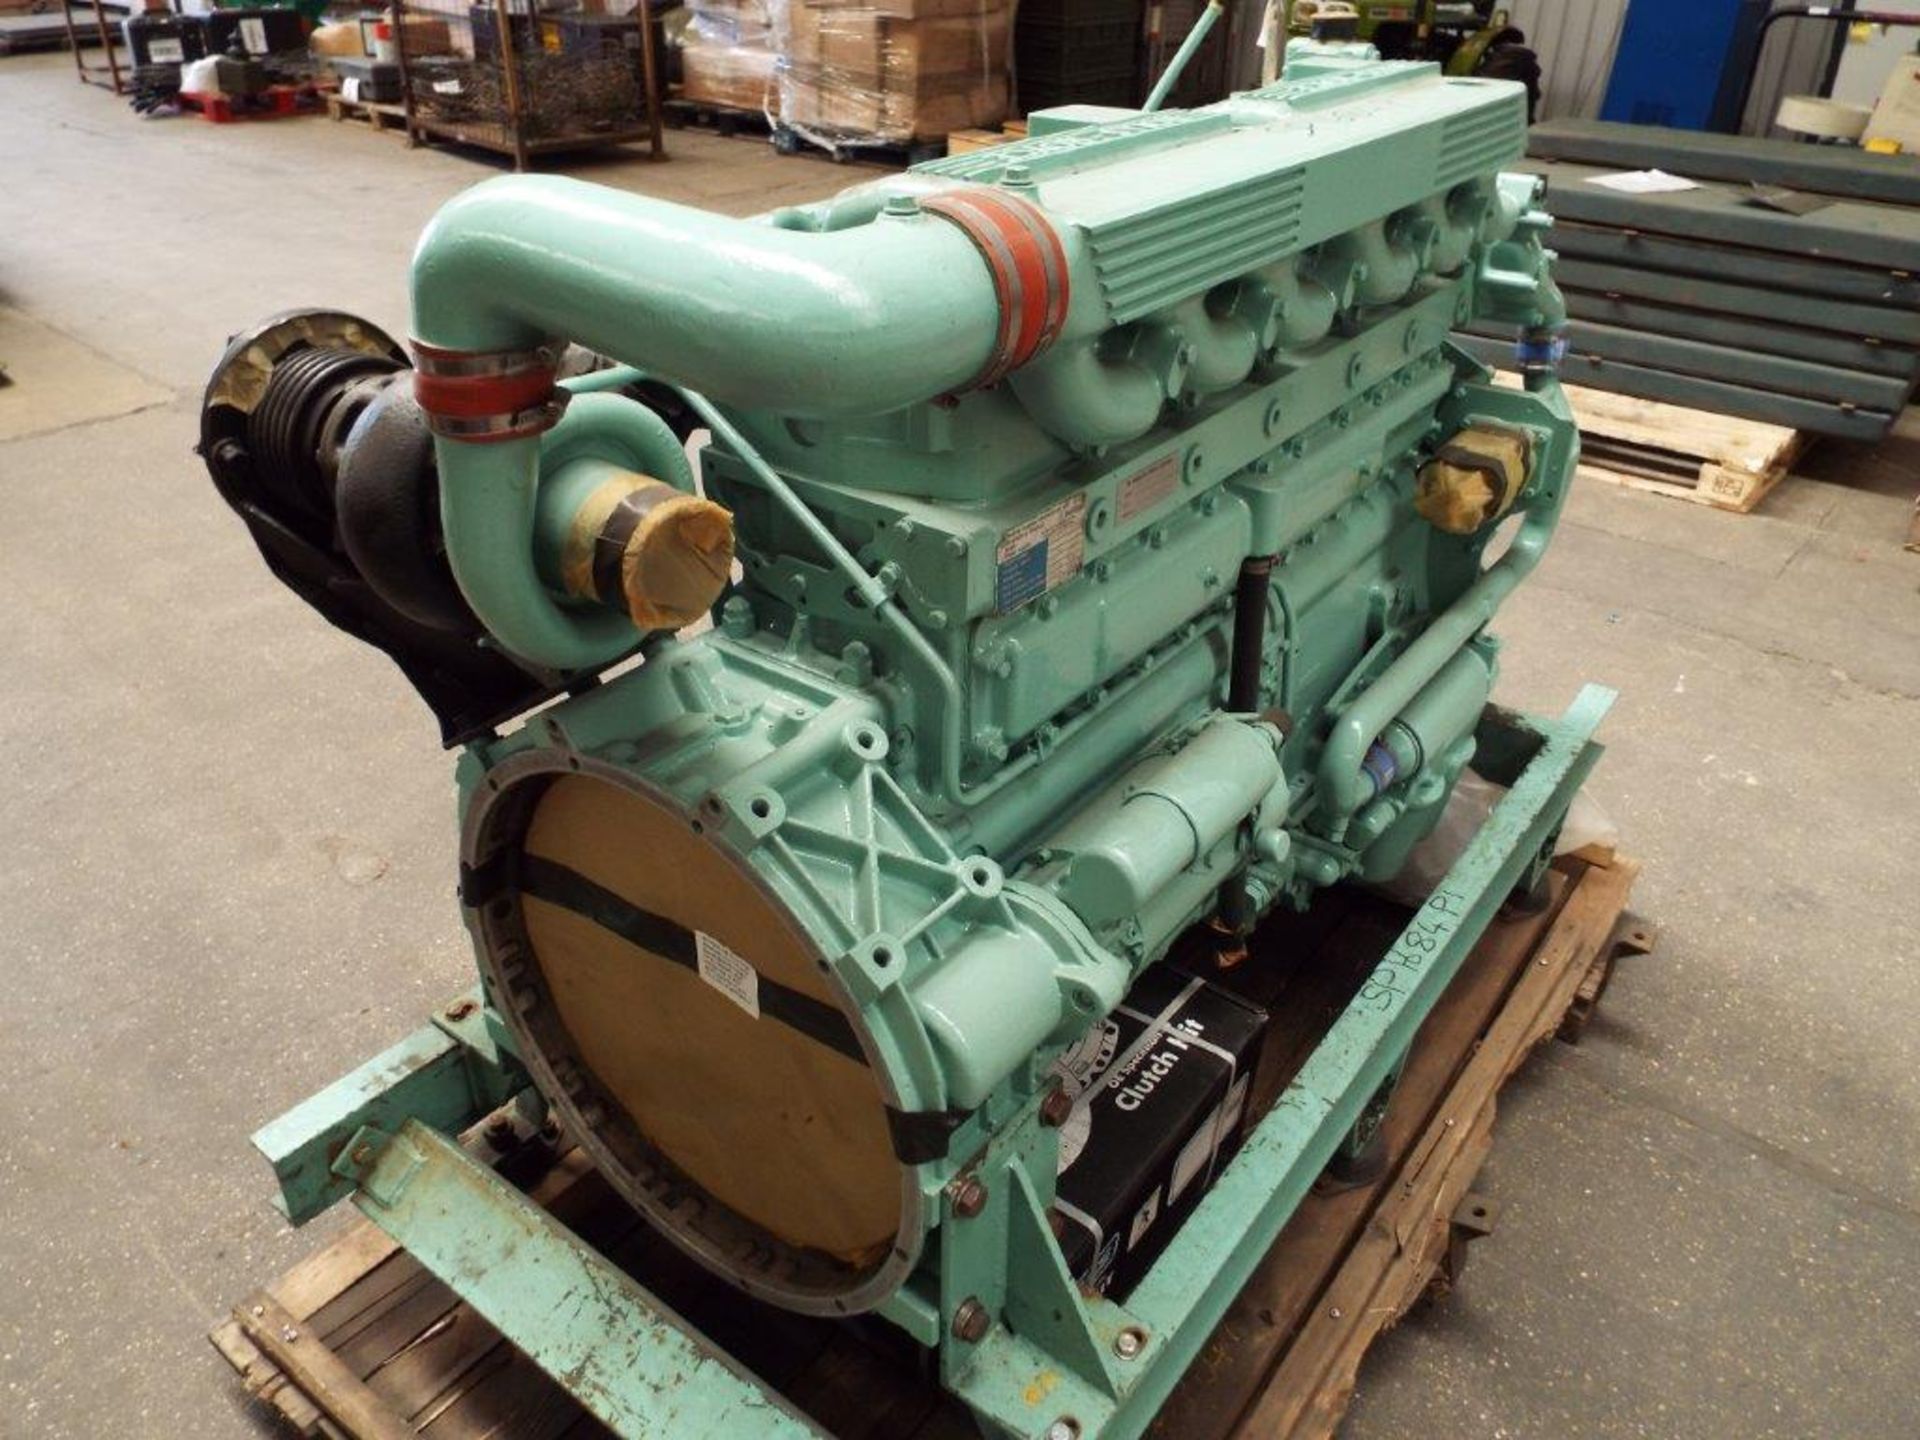 A1 Reconditioned Rolls Royce/Perkins 290L Straight 6 Turbo Diesel Engine for Foden Recovery Vehicles - Image 7 of 20